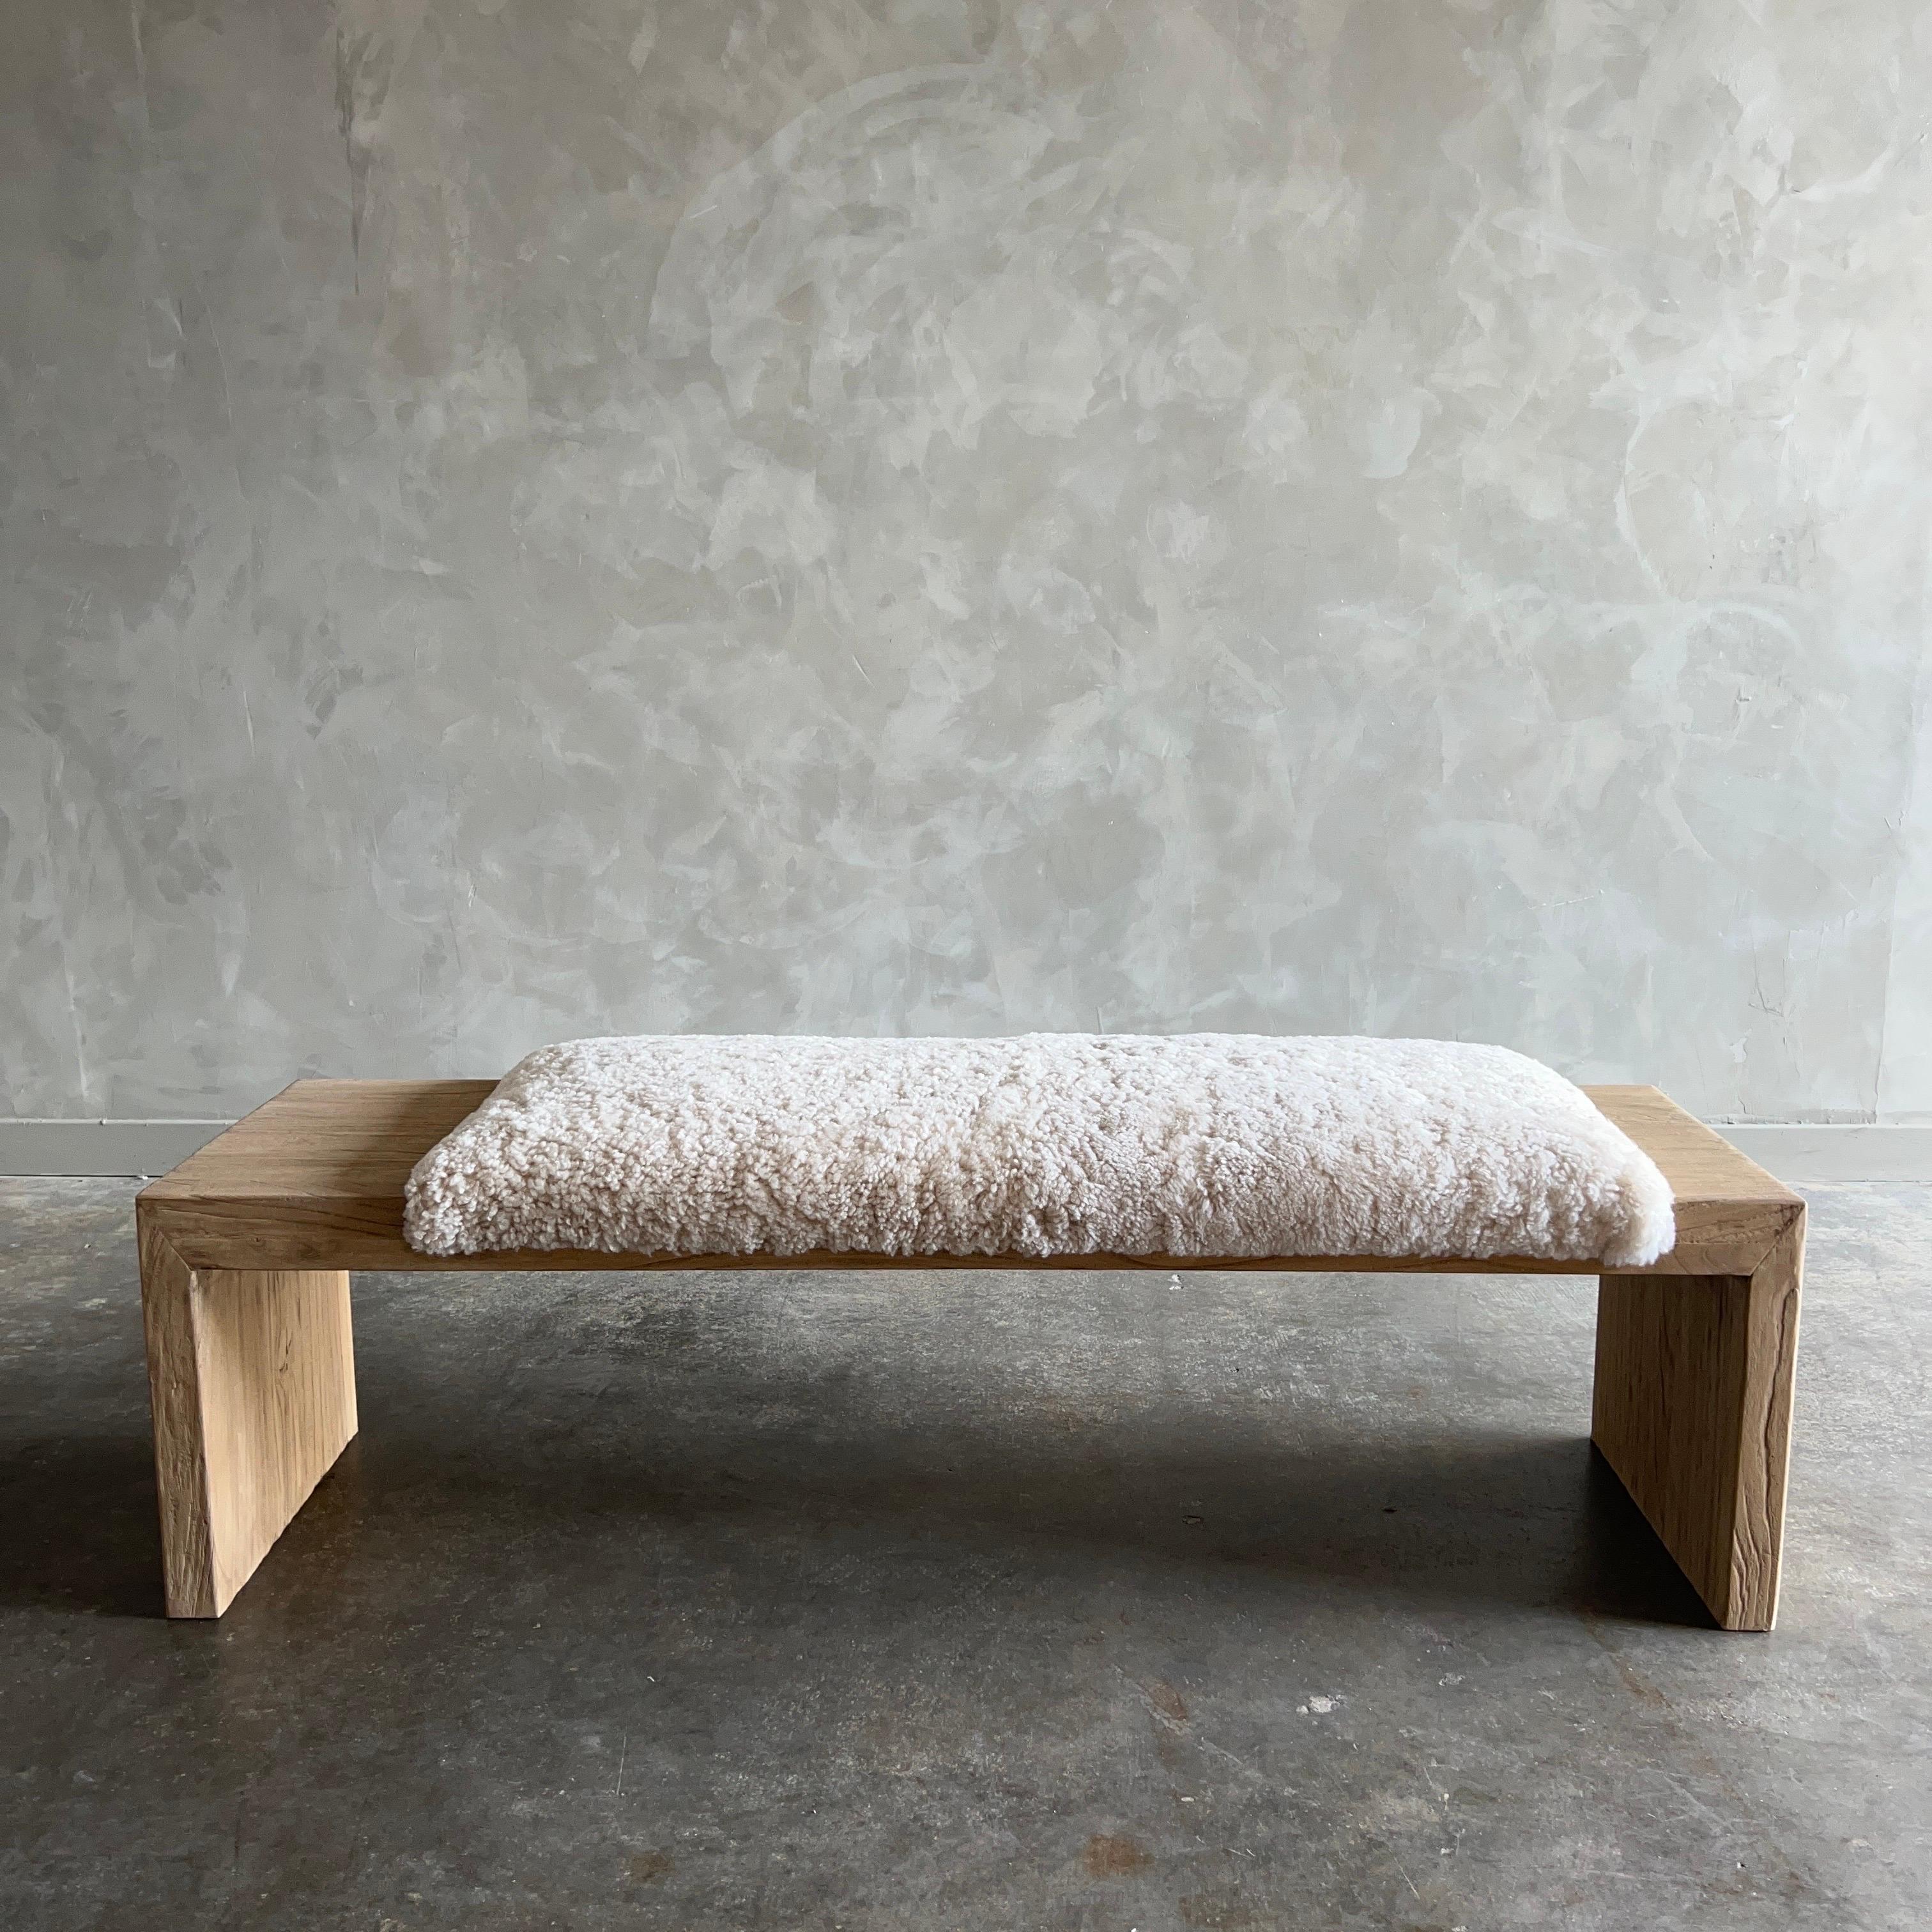 Hand-Crafted CUSTOM MADE TO ORDER Casi Norwegian Sheep Upholstered Elm Bench